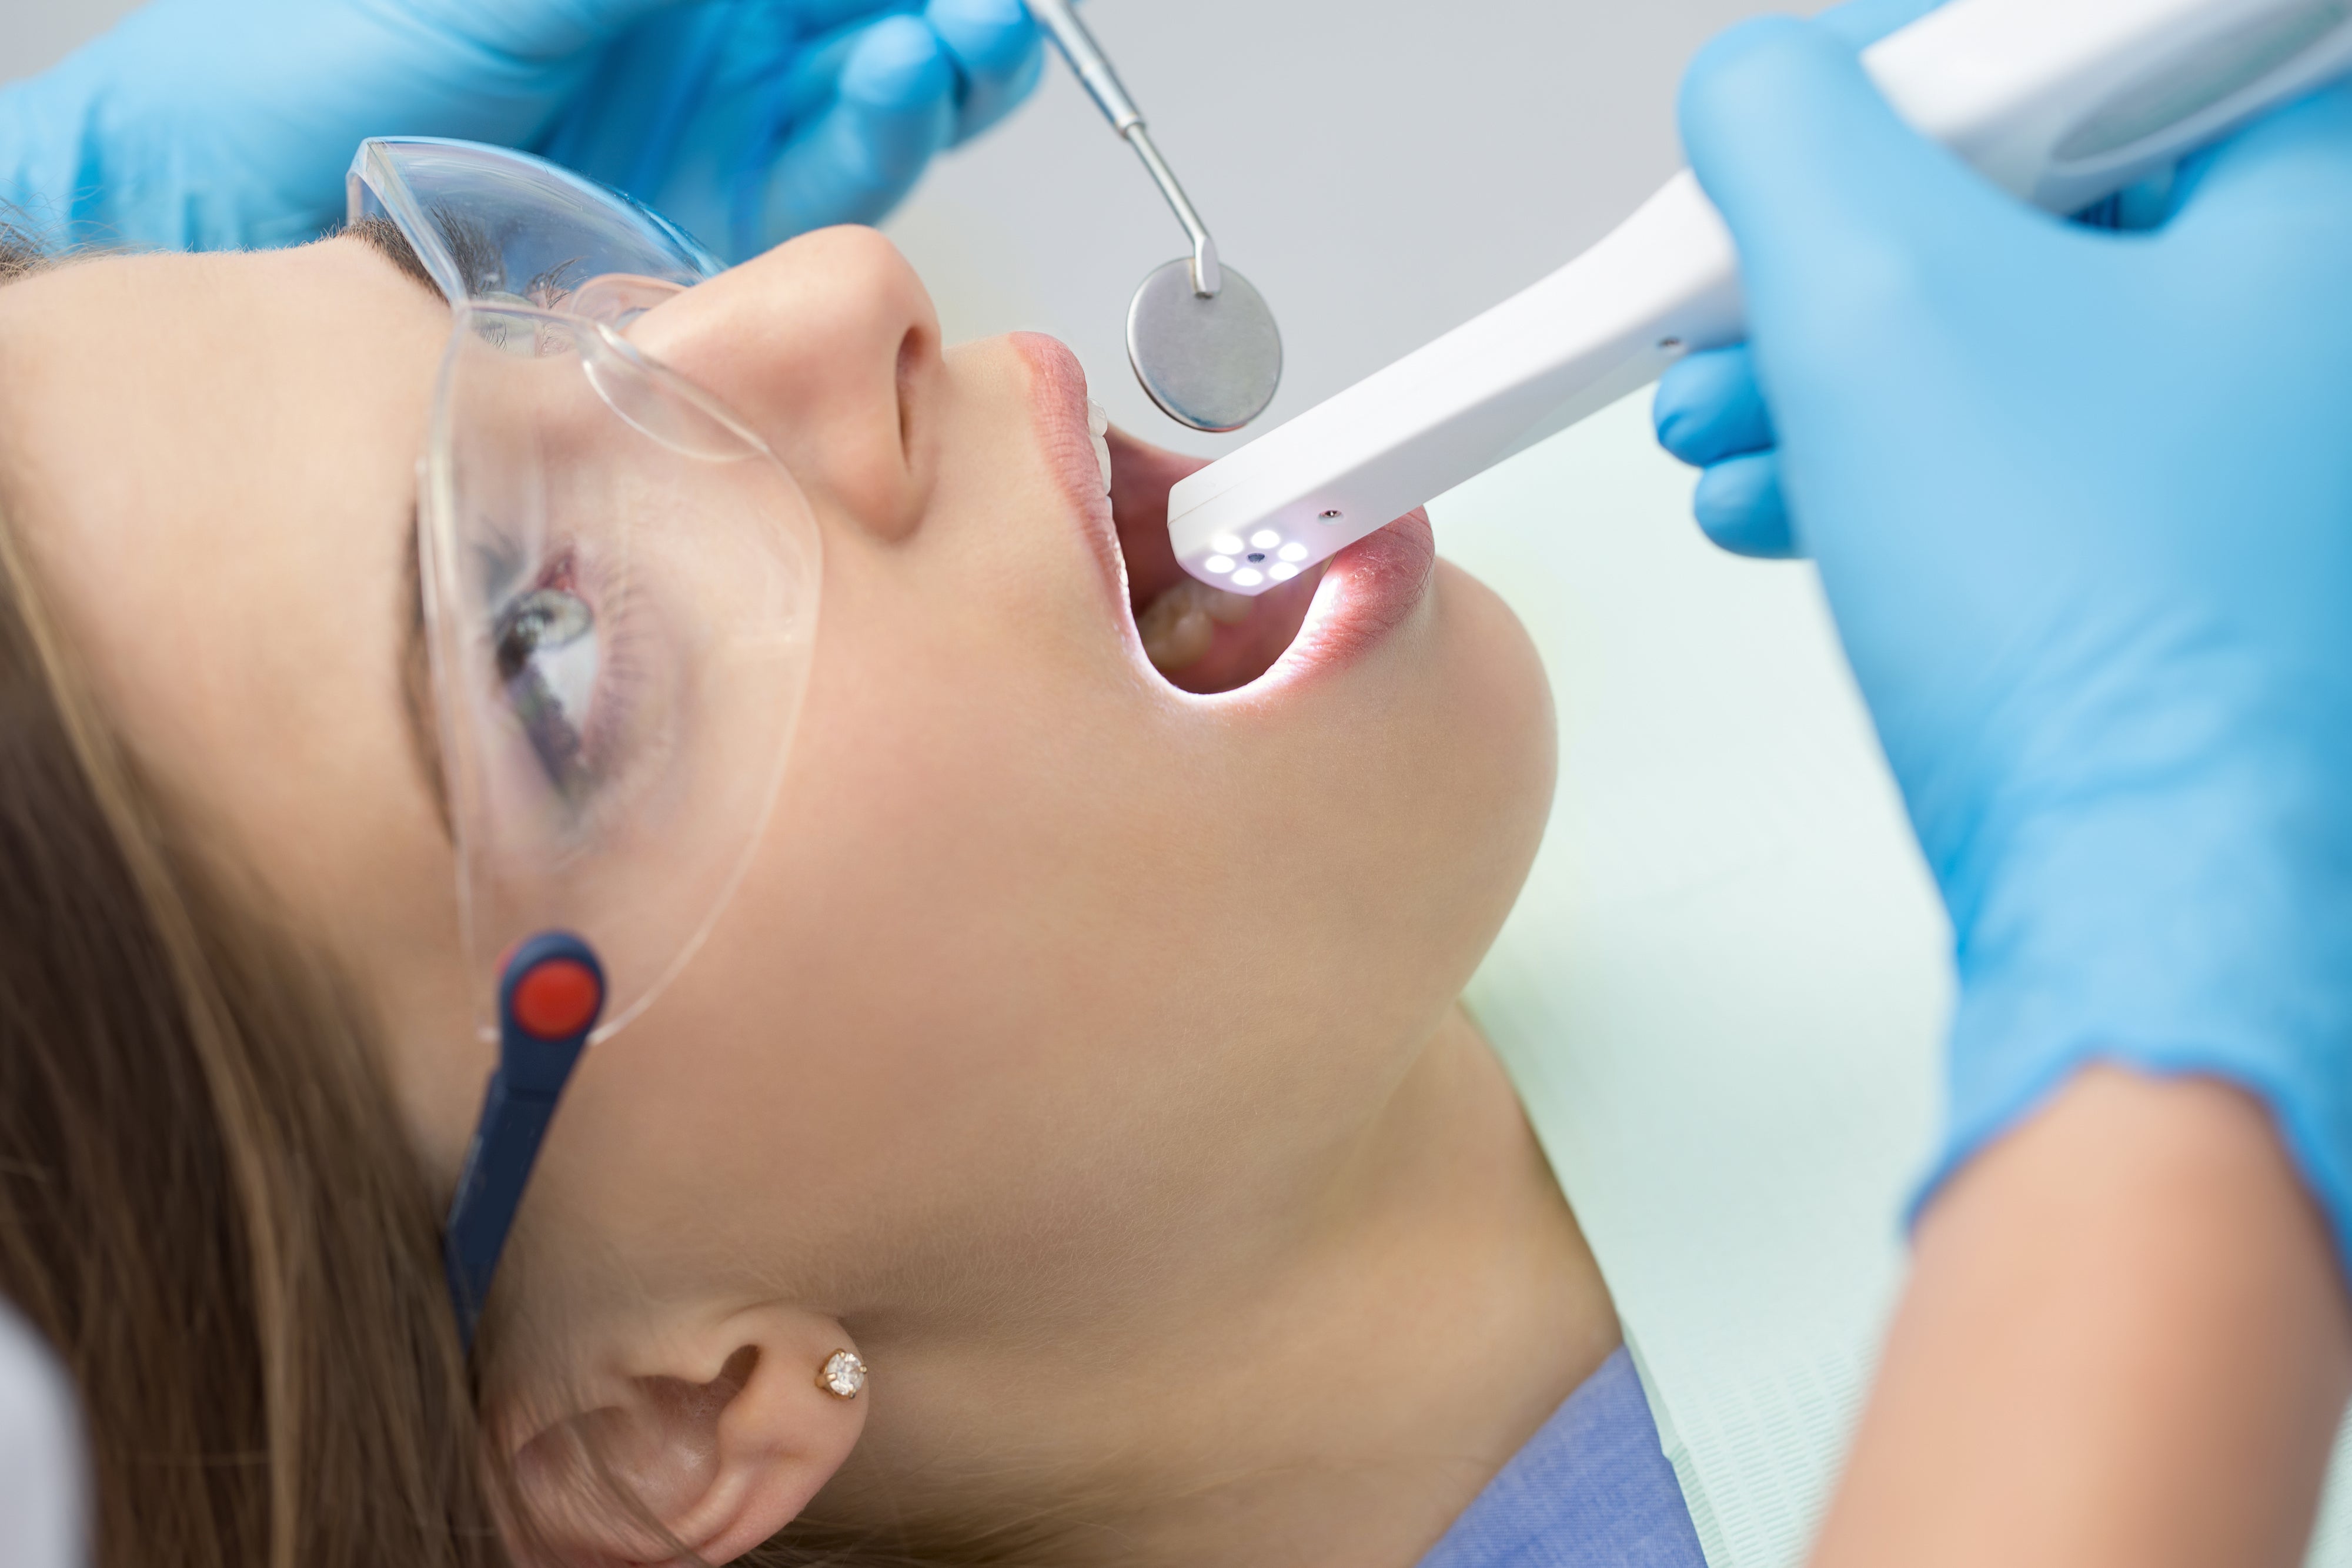 Introduction to intraoral cameras: What are they and how do they work?